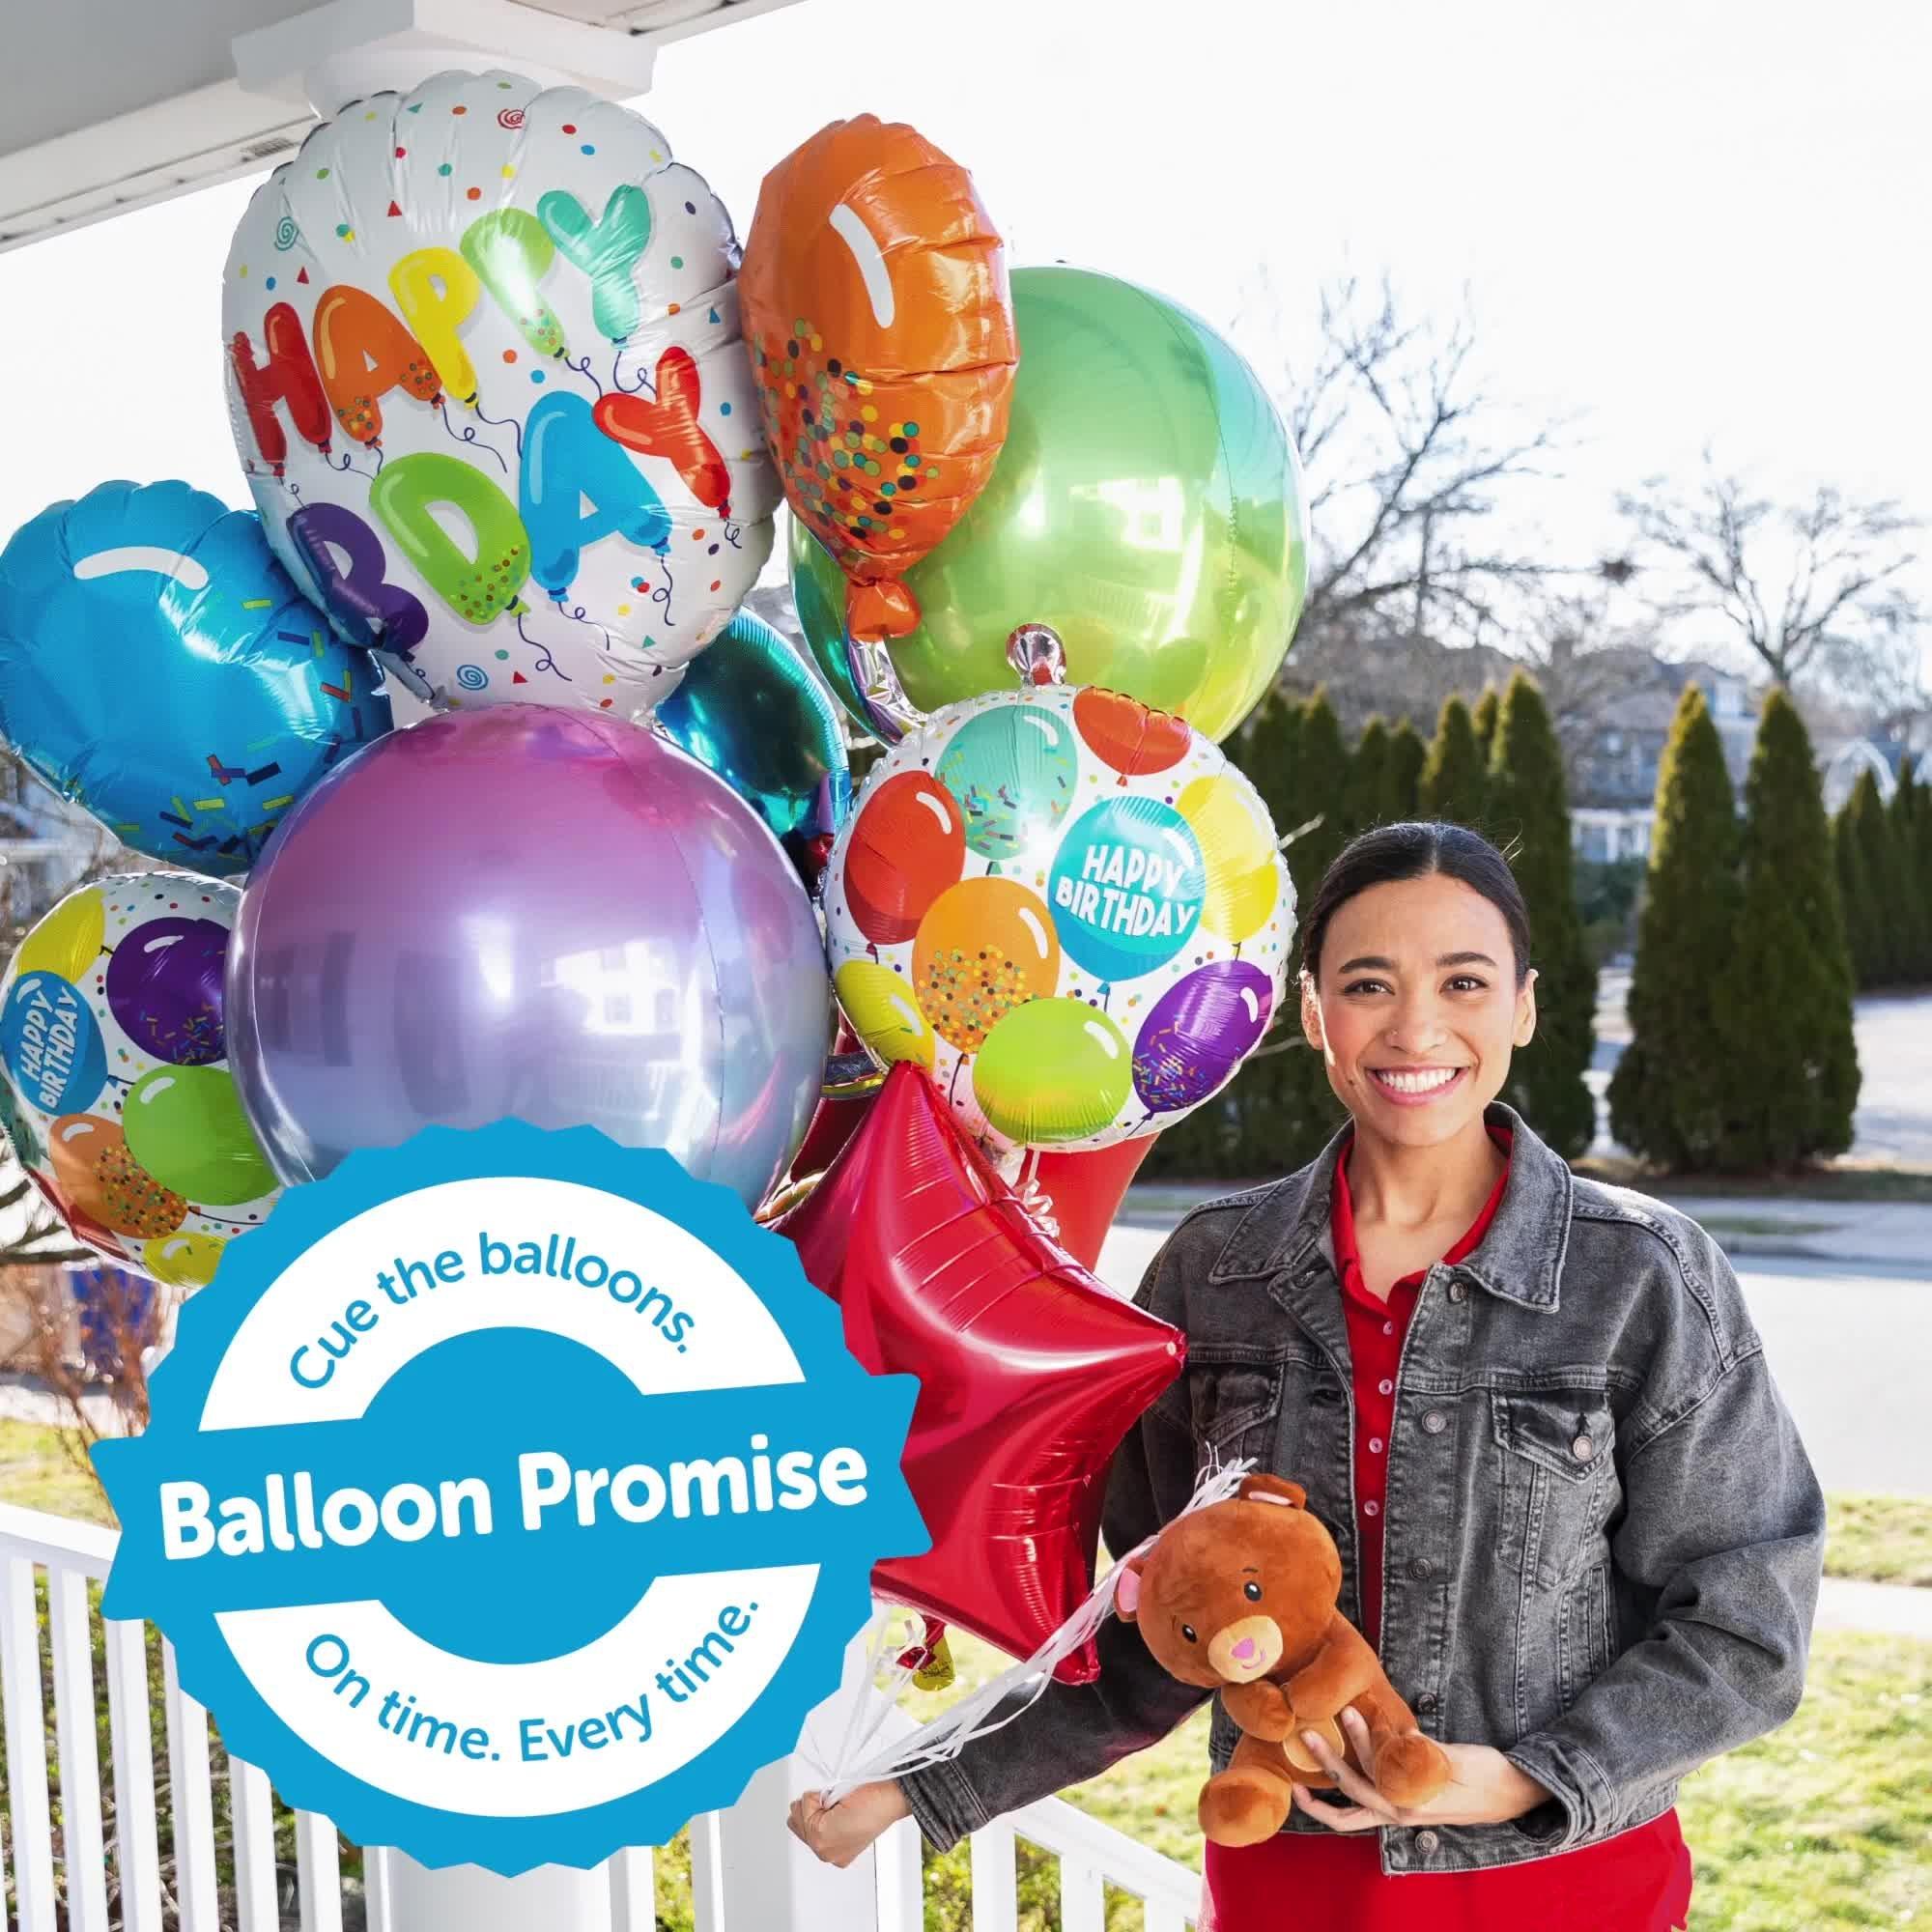 Premium Colorful Best Mom Ever Foil Balloon Bouquet with Balloon Weight & Lindt Chocolates Mother's Day Gift Set